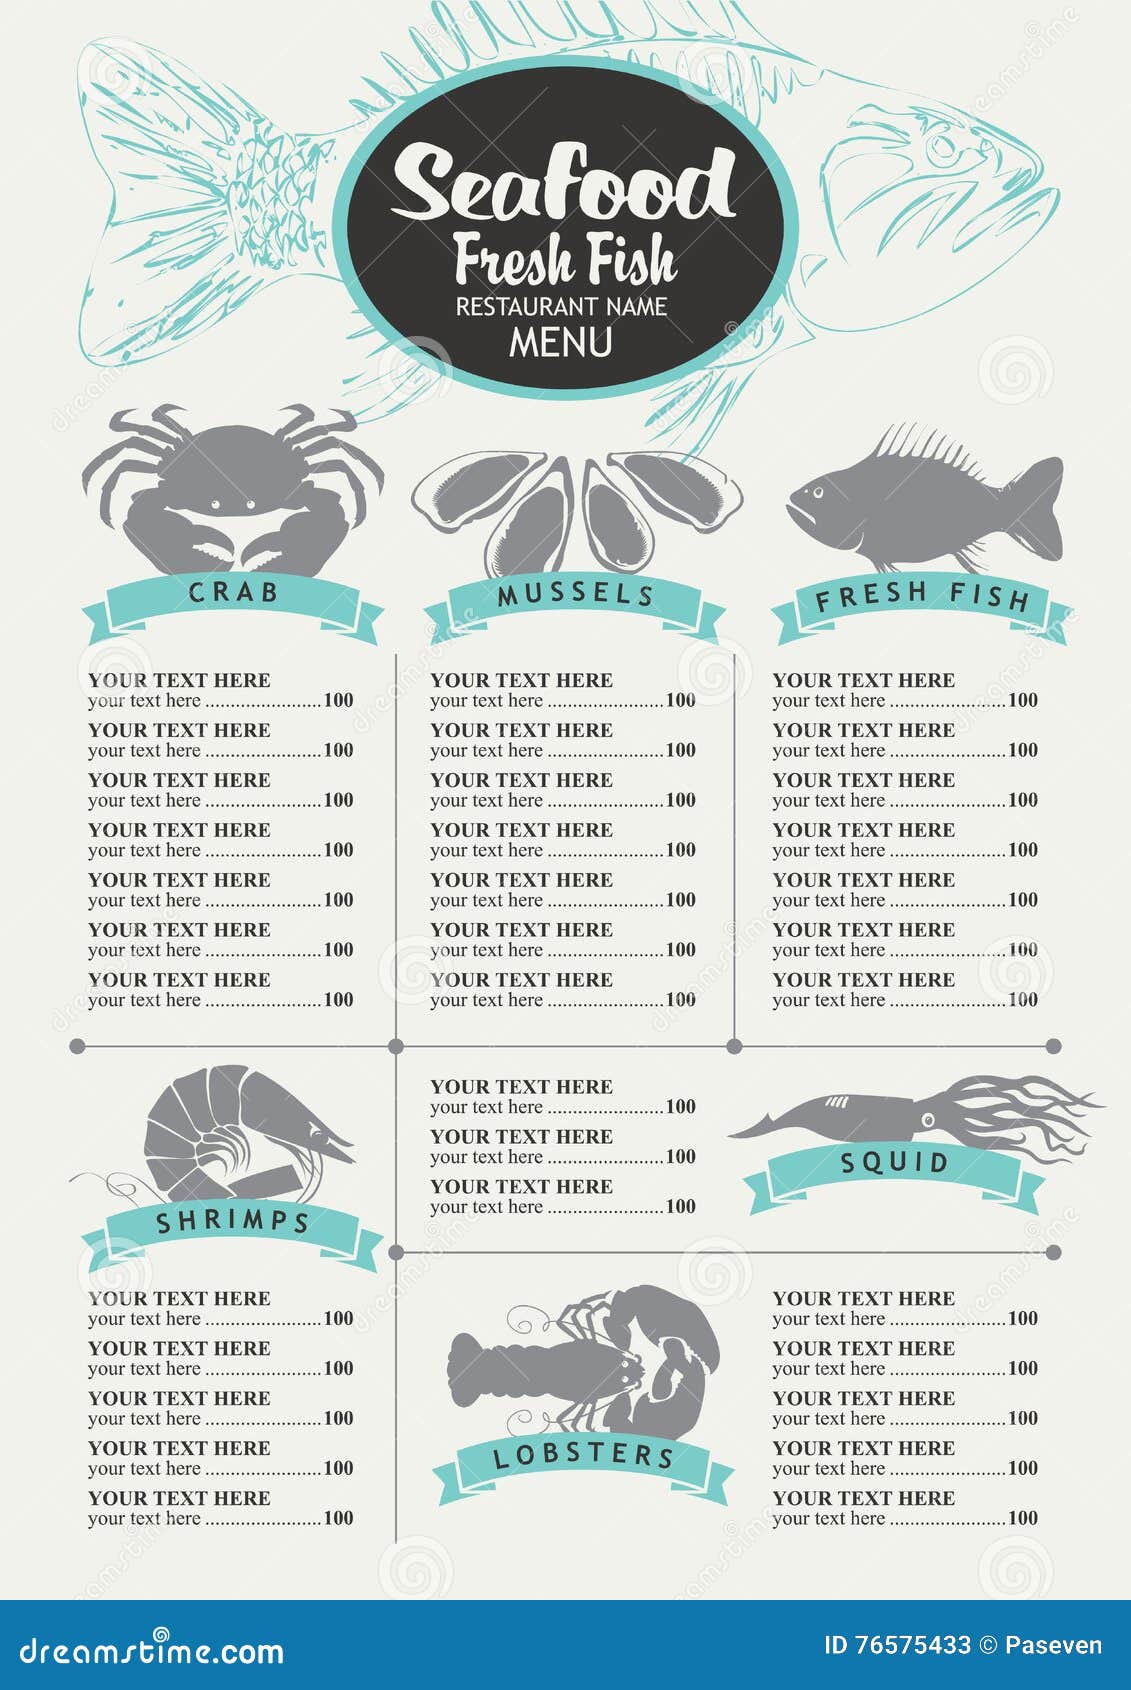 Menu with Price List for a Seafood Restaurant Stock Vector - Illustration  of delicious, lobster: 76575433